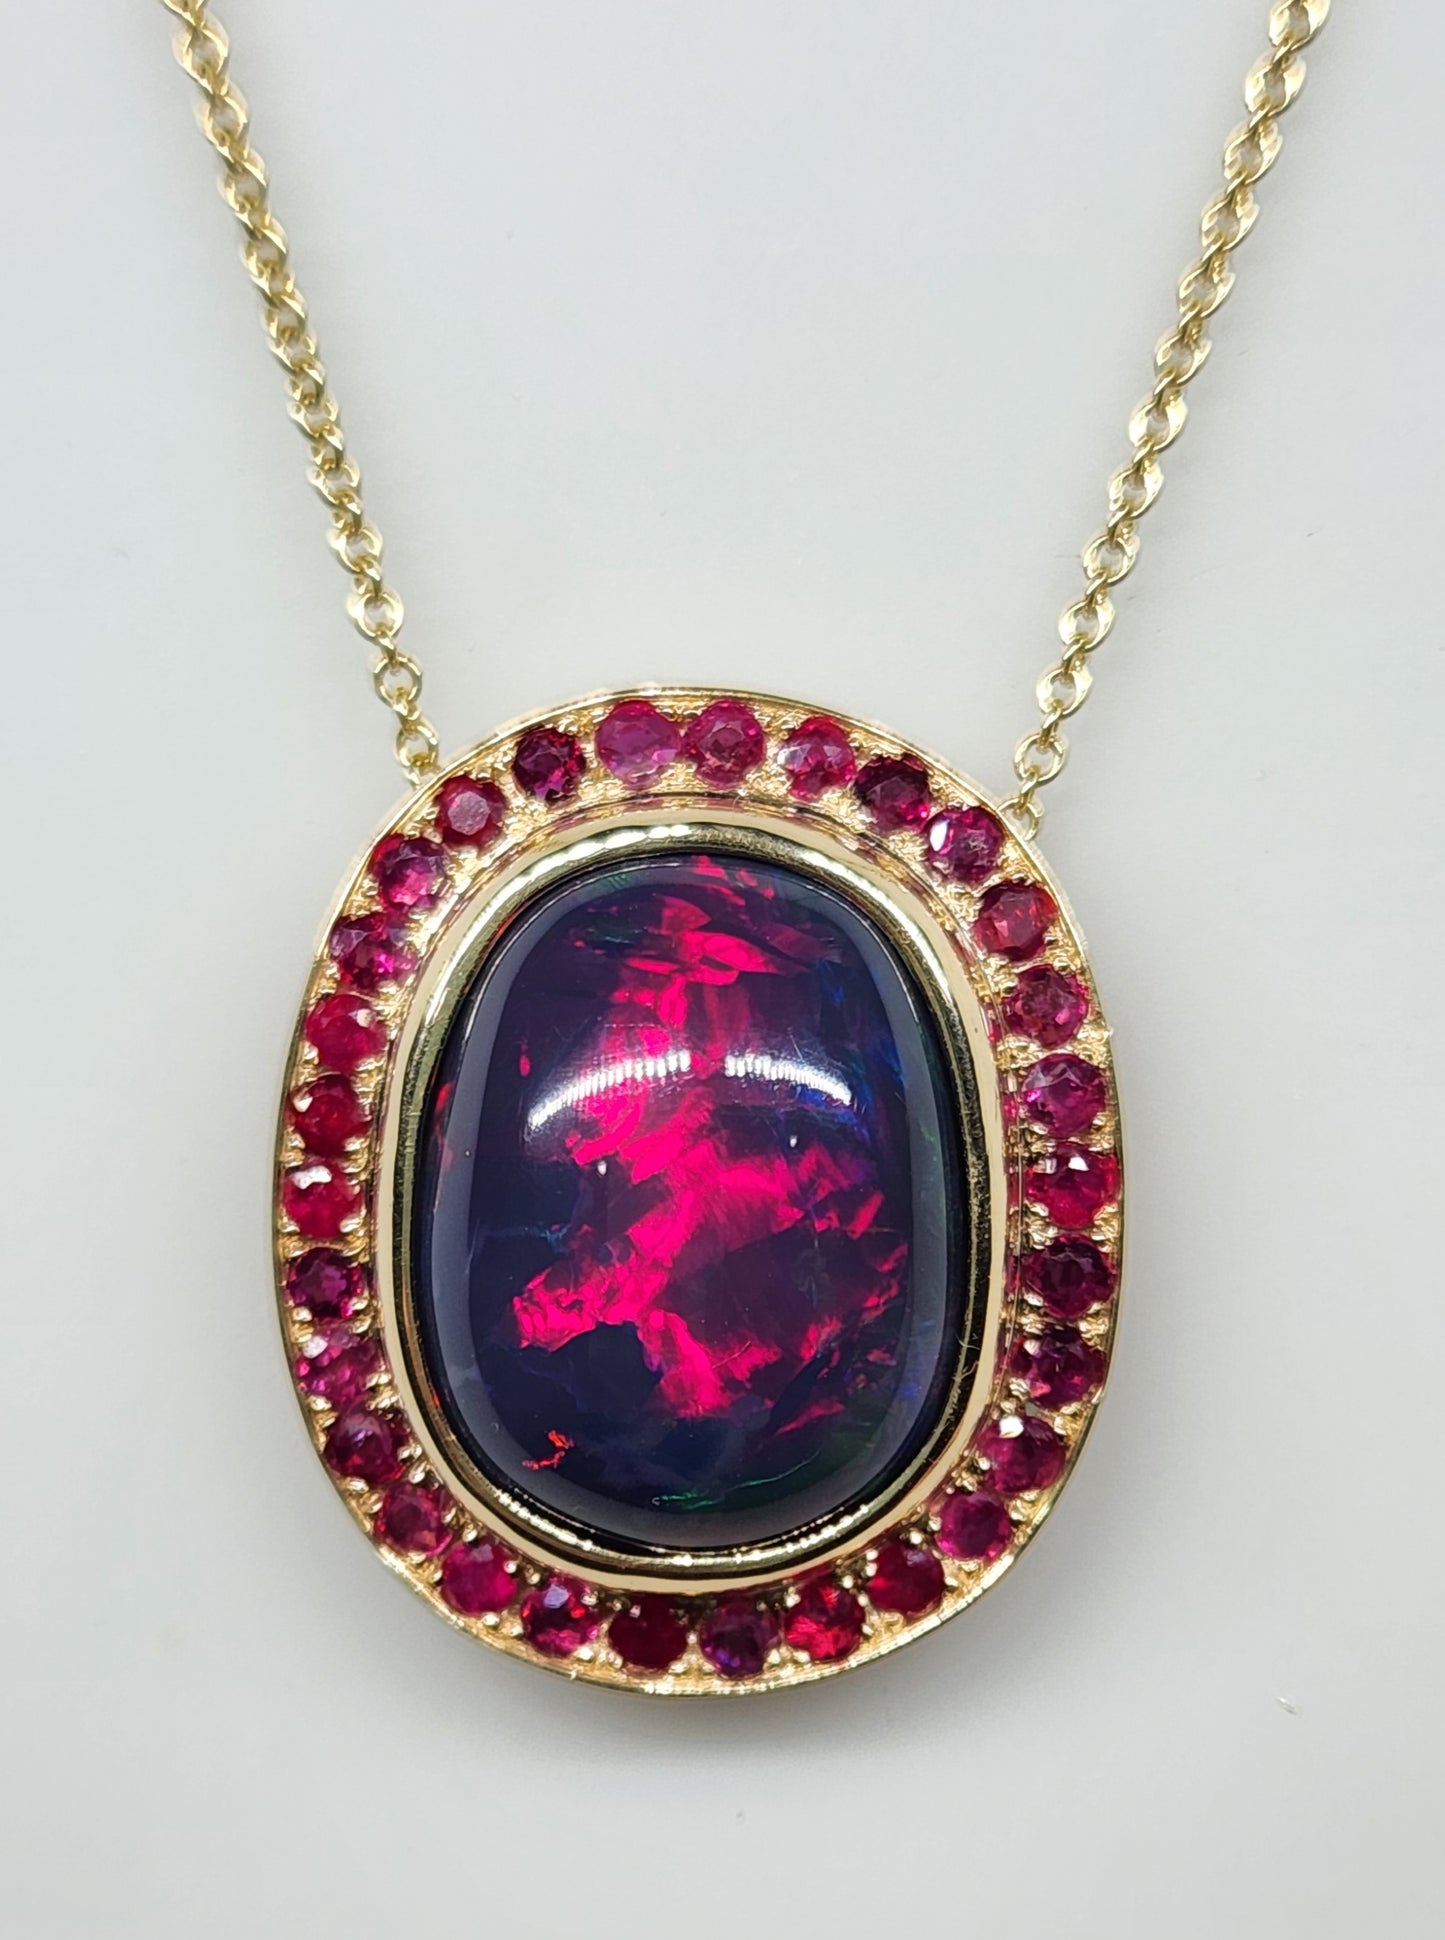 Black Opal & Ruby Pendant 14k Yellow Gold Necklace #368